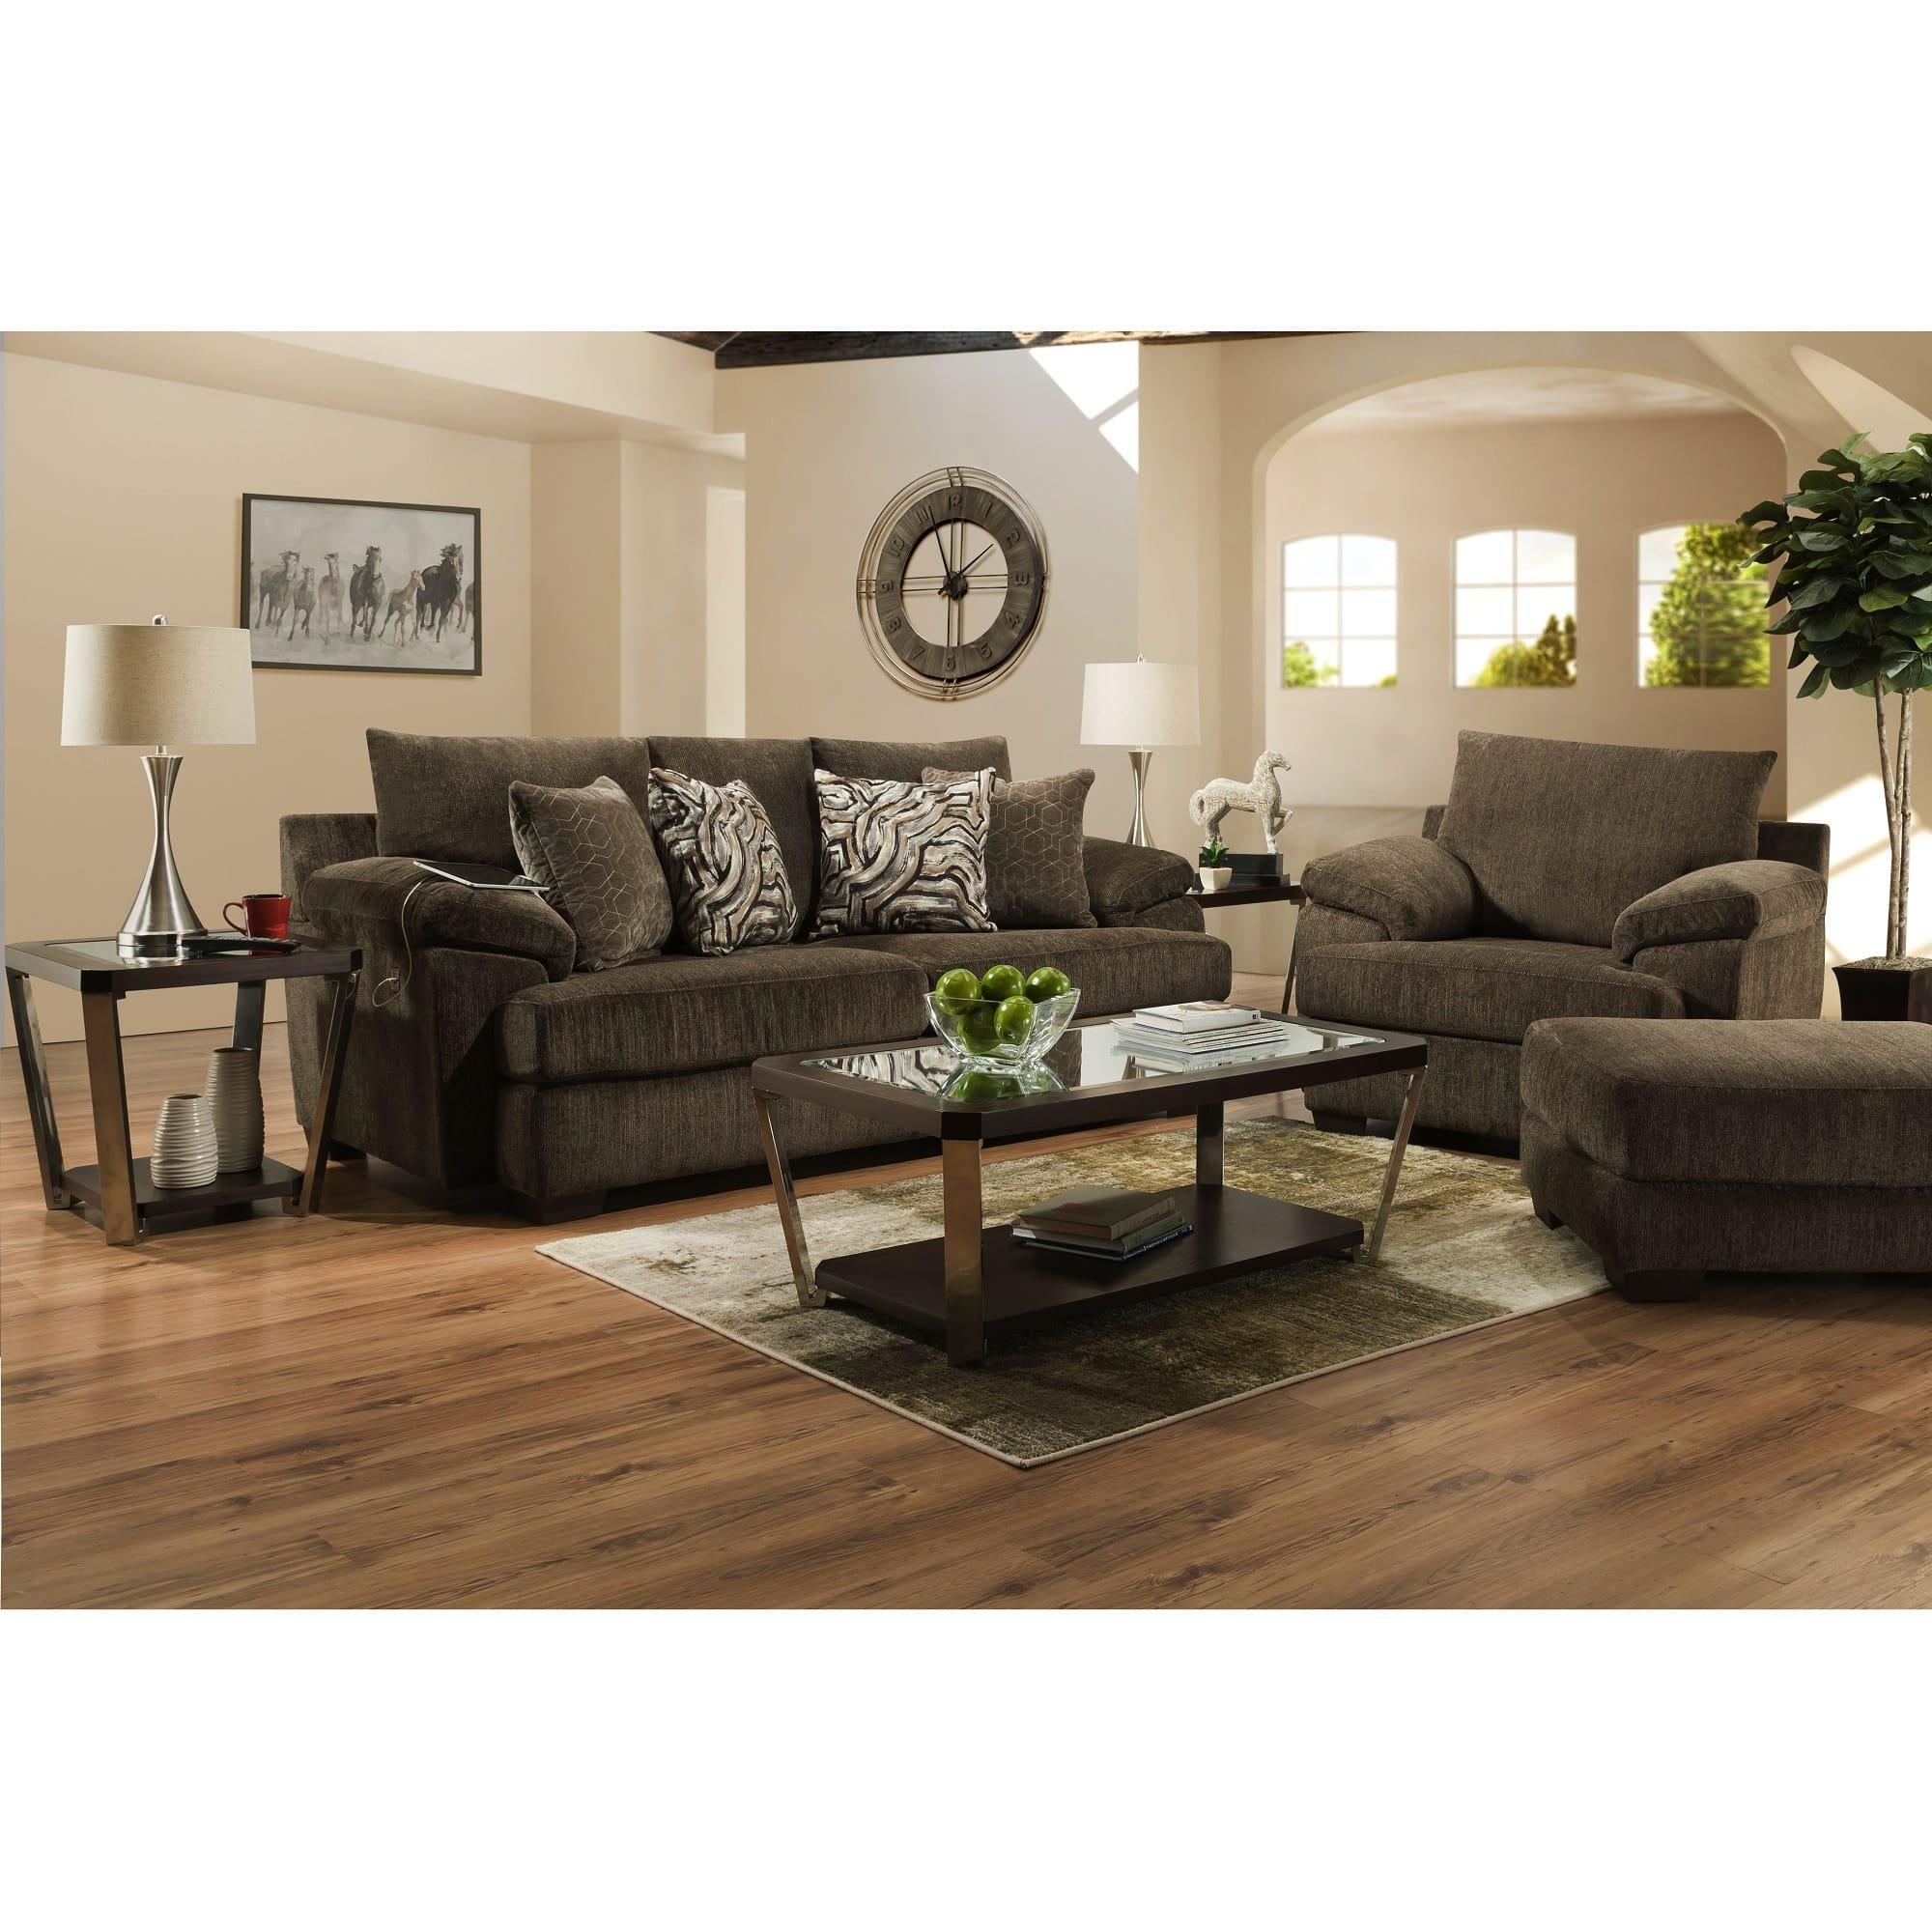 Rent To Own Franklin 3 Piece Phoenix Living Room Collection At Aarons Today